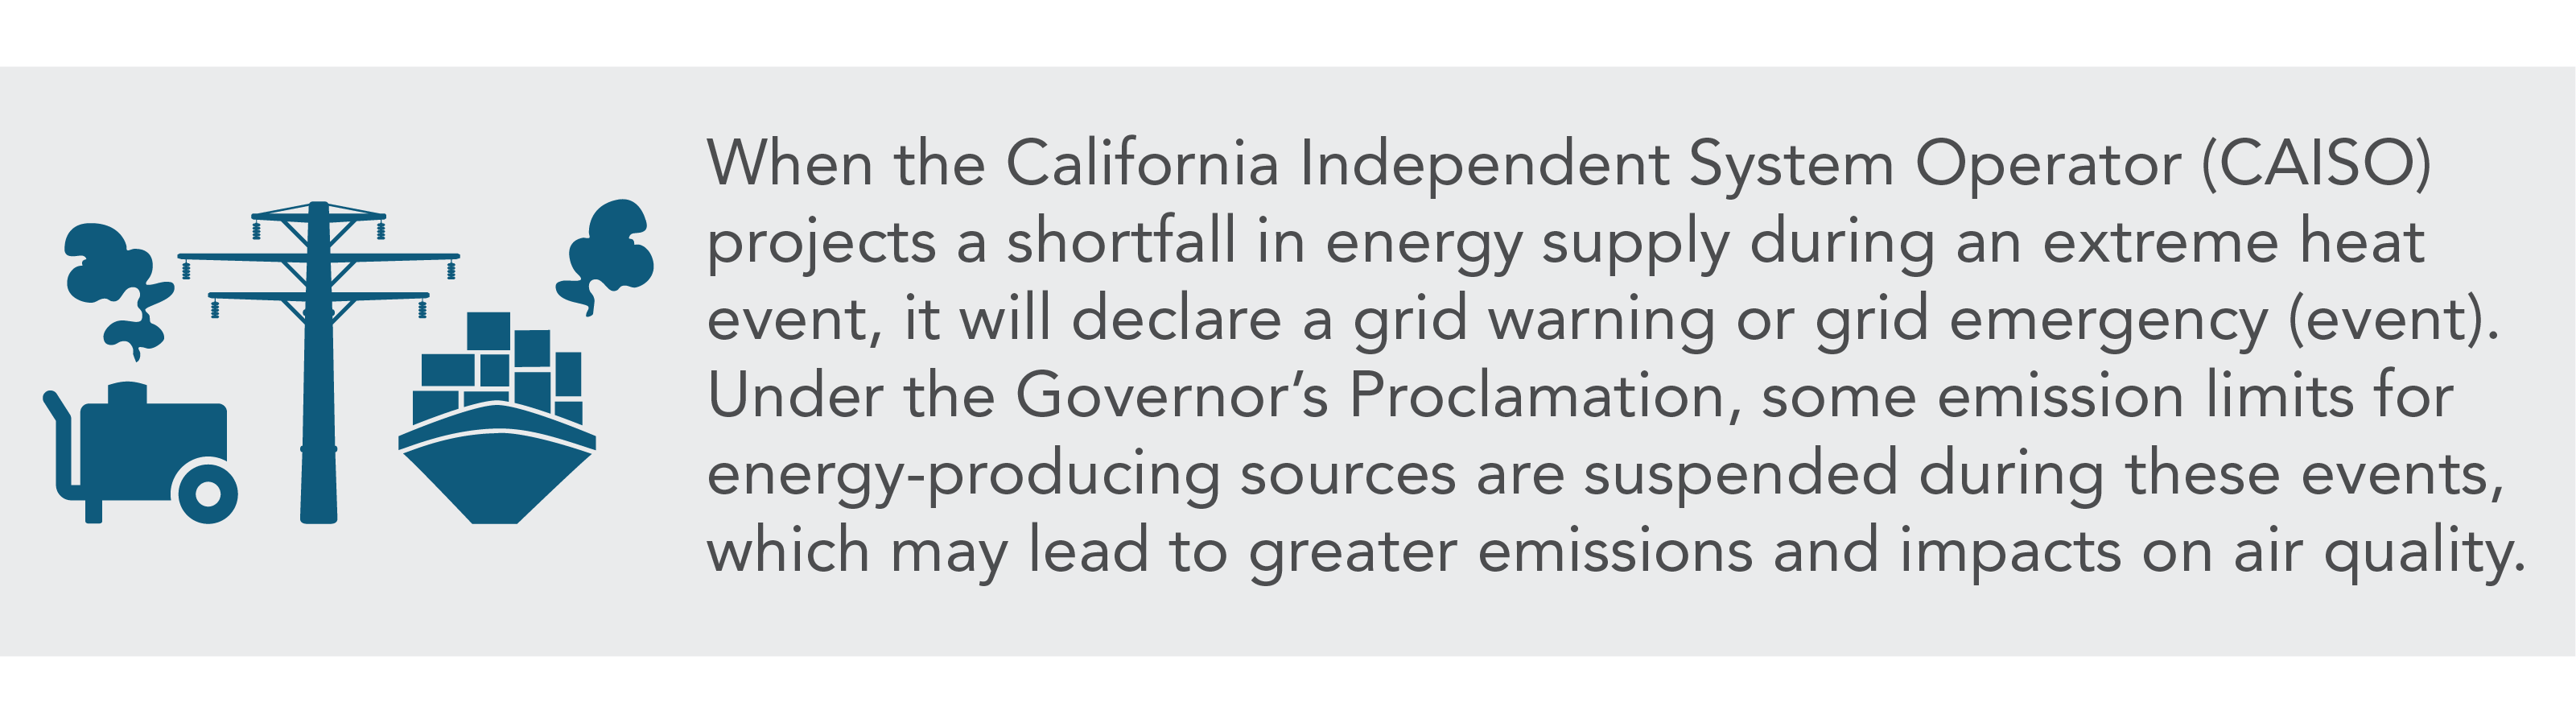 CHIRP step 1 - grid warning. When the California Independent System Operator (CAISO) projects a shortfall in energy supply during an extreme weather event, it will declare a grid warning or grid emergency (event). Under the Governor's Proclamation, some emsisison limits for energy-producting sources are suspended during these events, which may lead to greater emisssions and impacts on air quality.